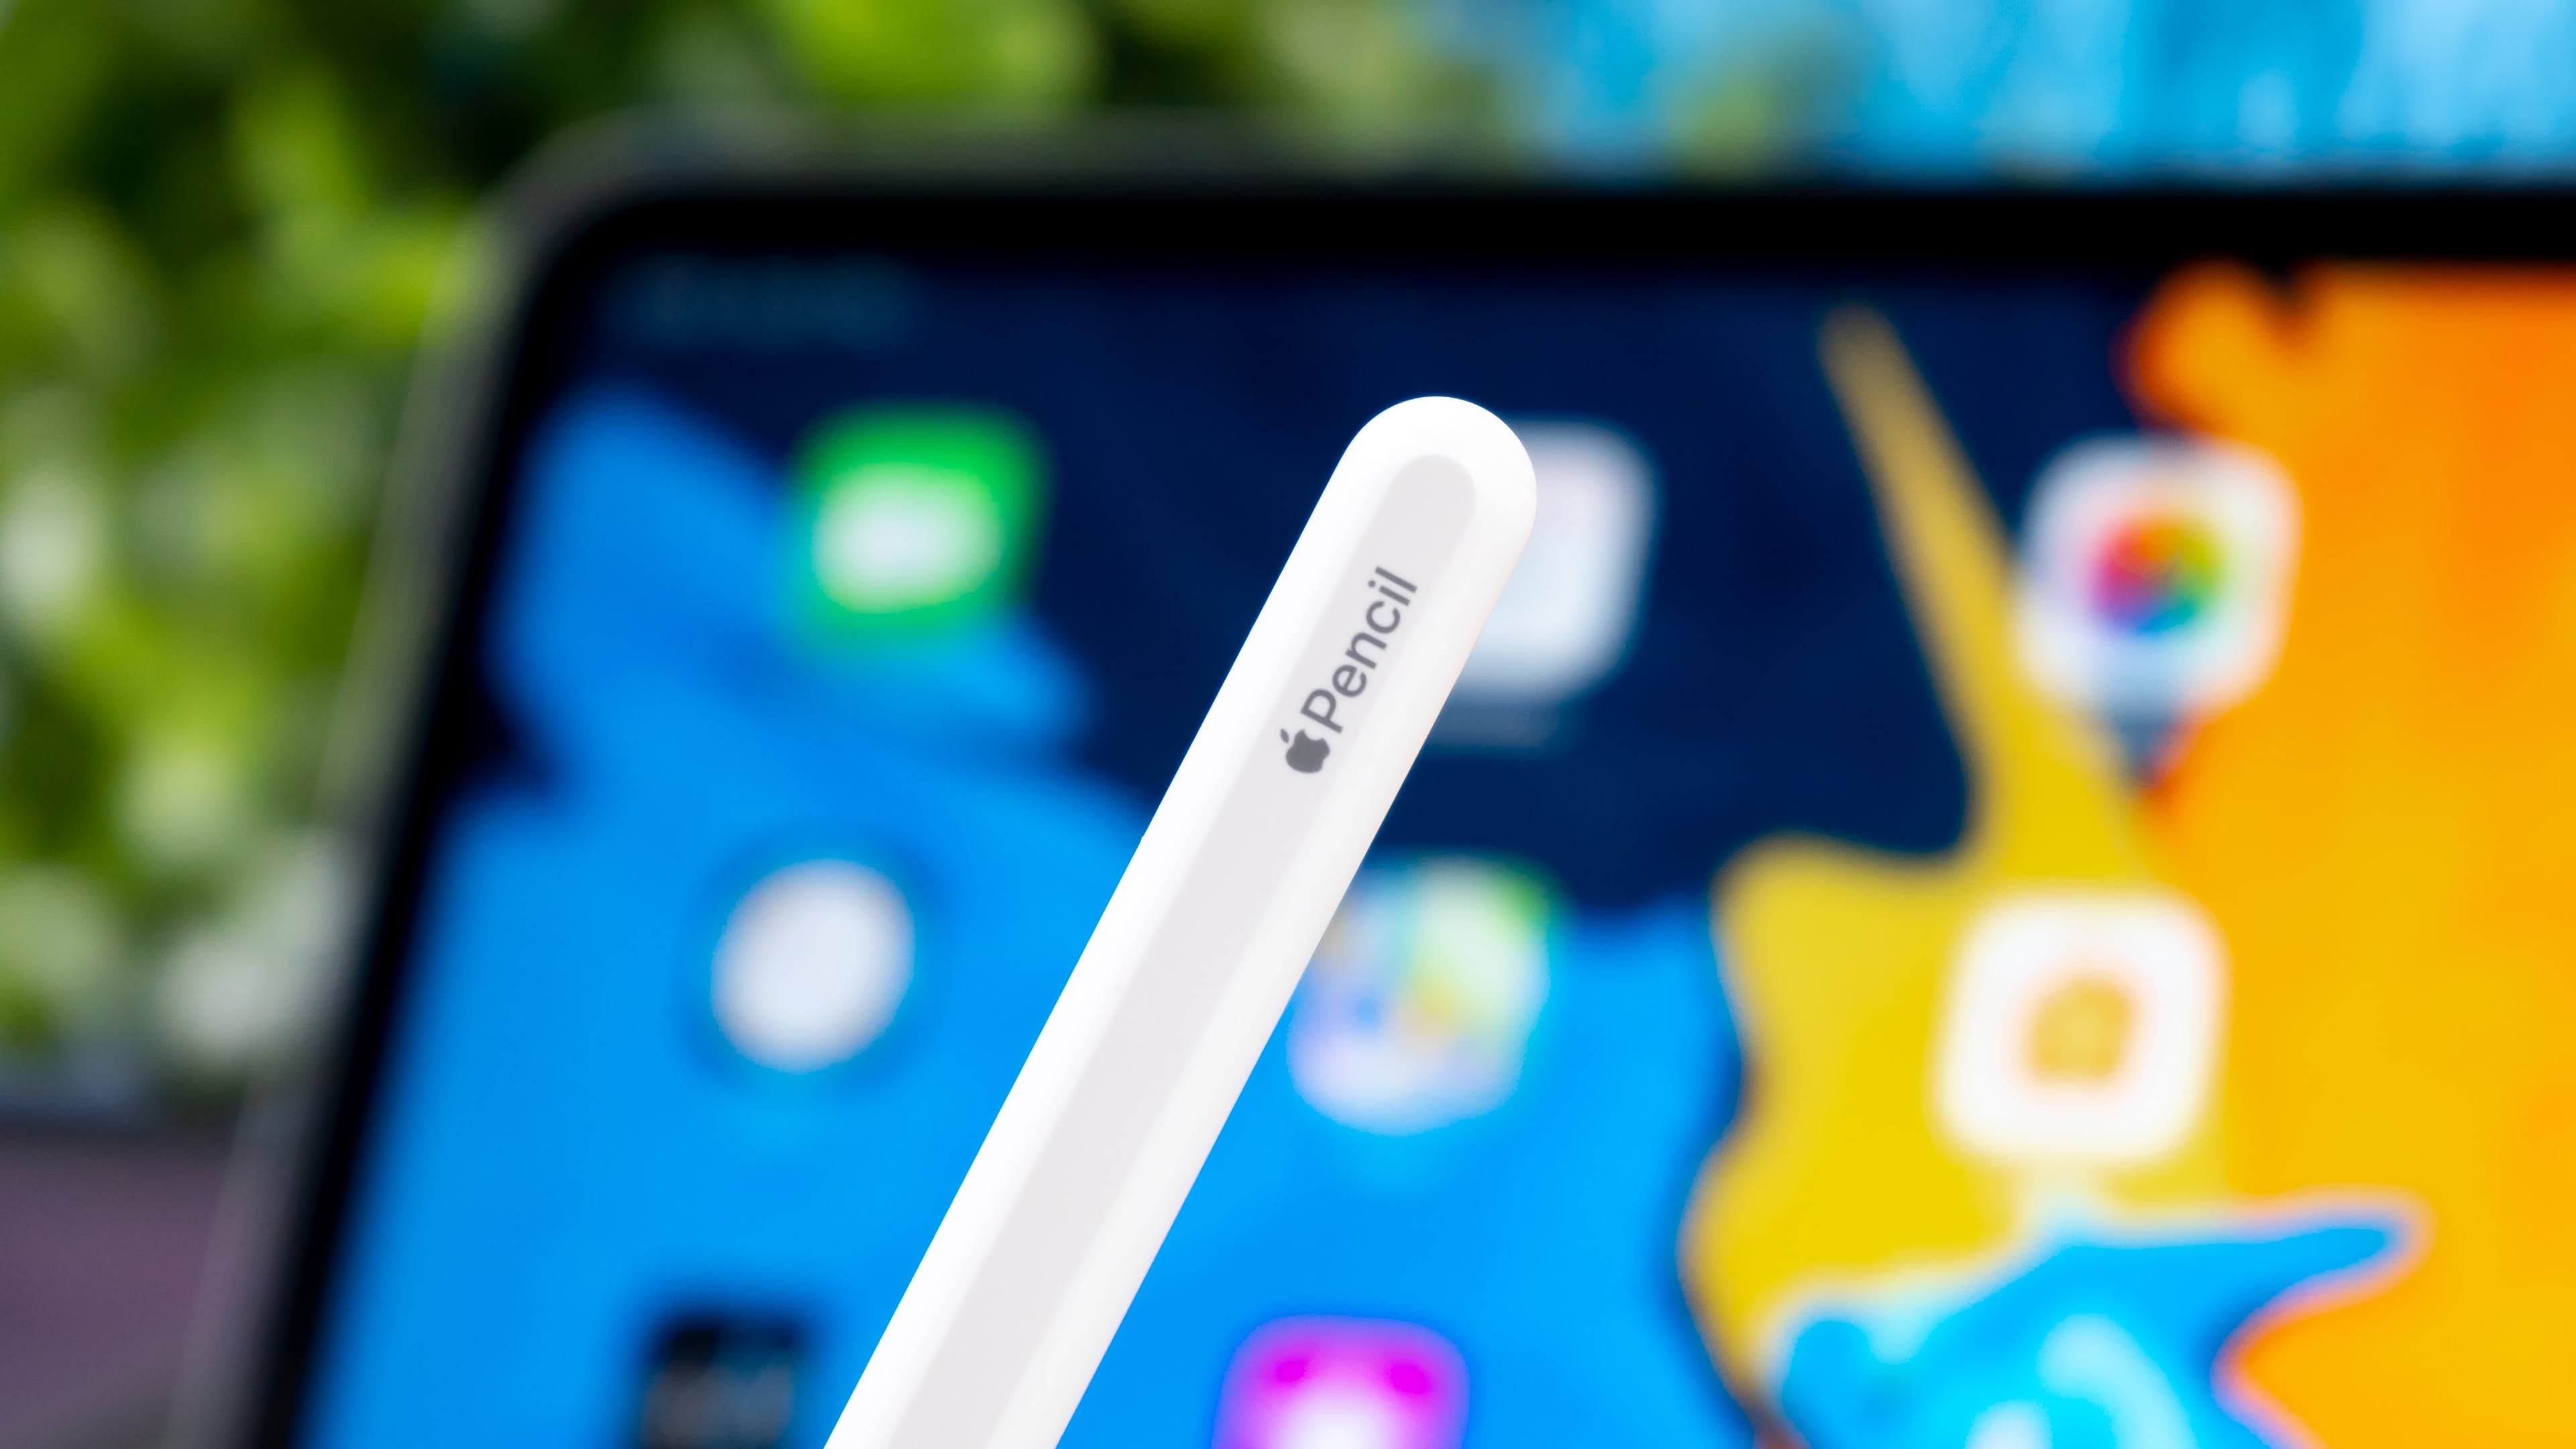 iPadOS 16.4 brings tilt and azimuth support to the Apple Pencil hover feature